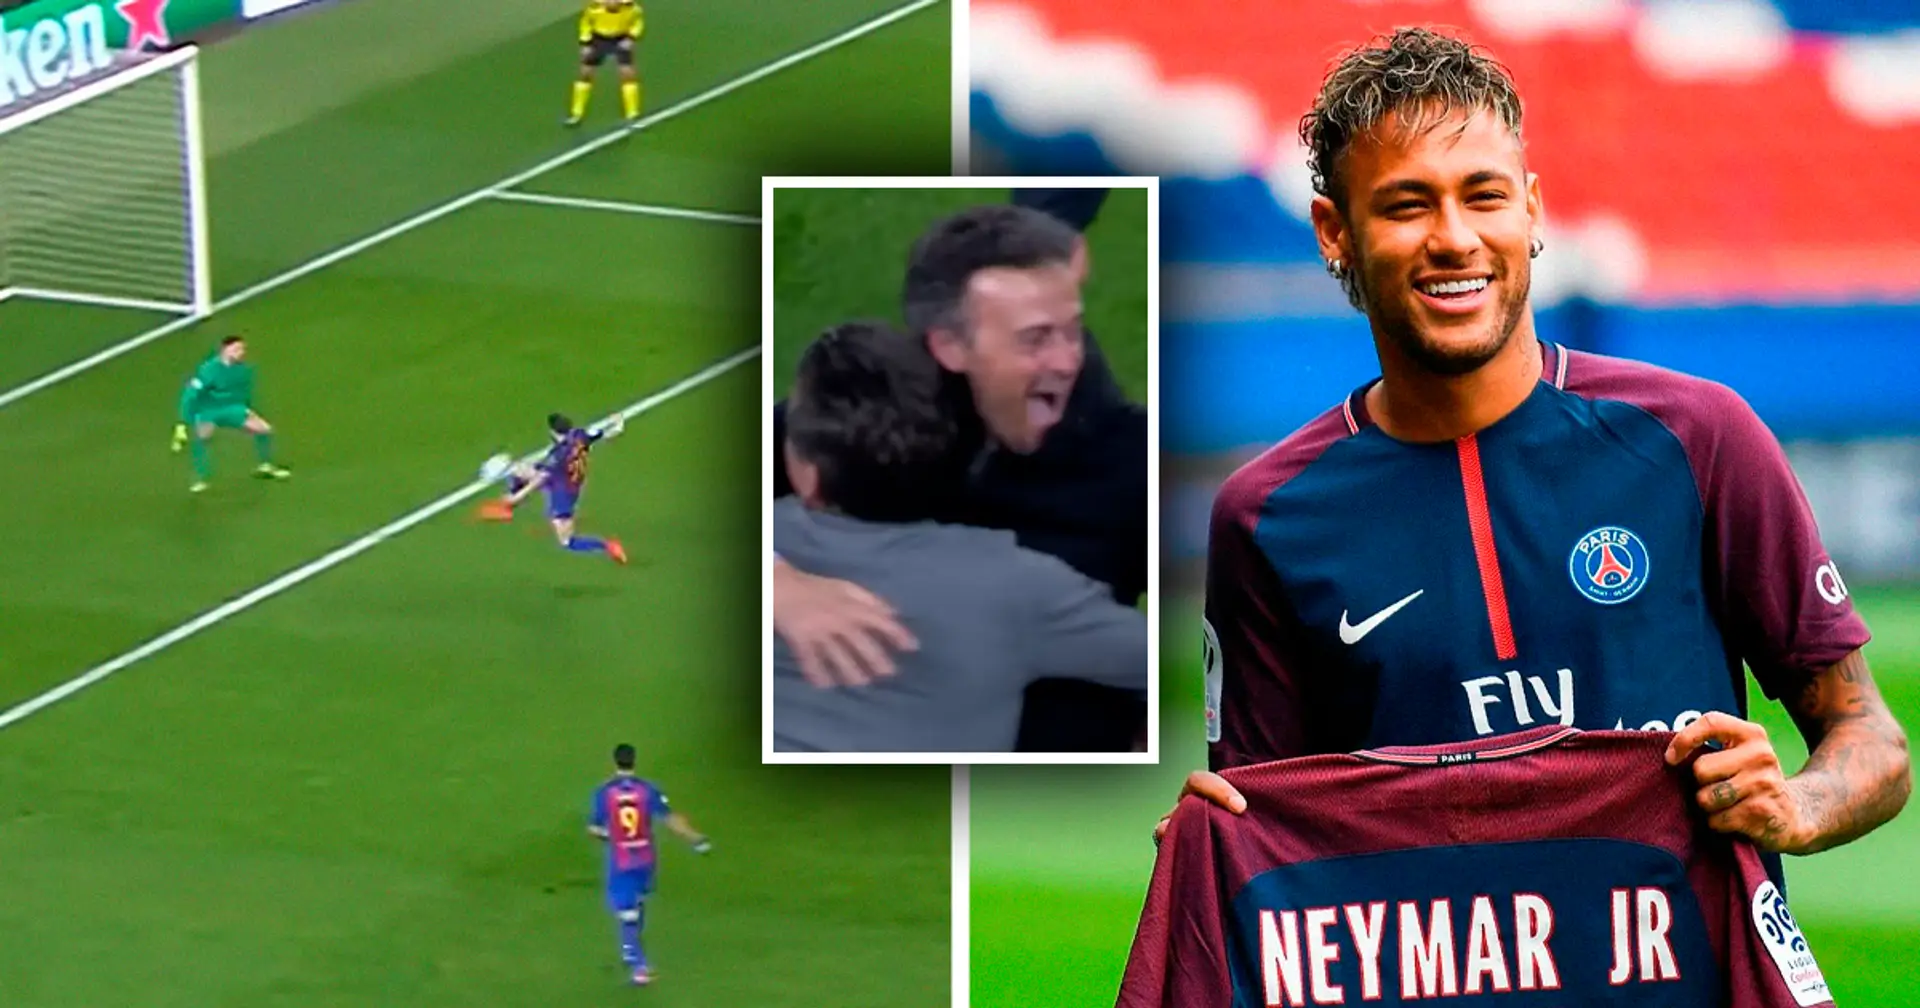 Unforgettable 'Remontada' and Neymar saga: history behind Barca vs. PSG rivalry in 7 key facts